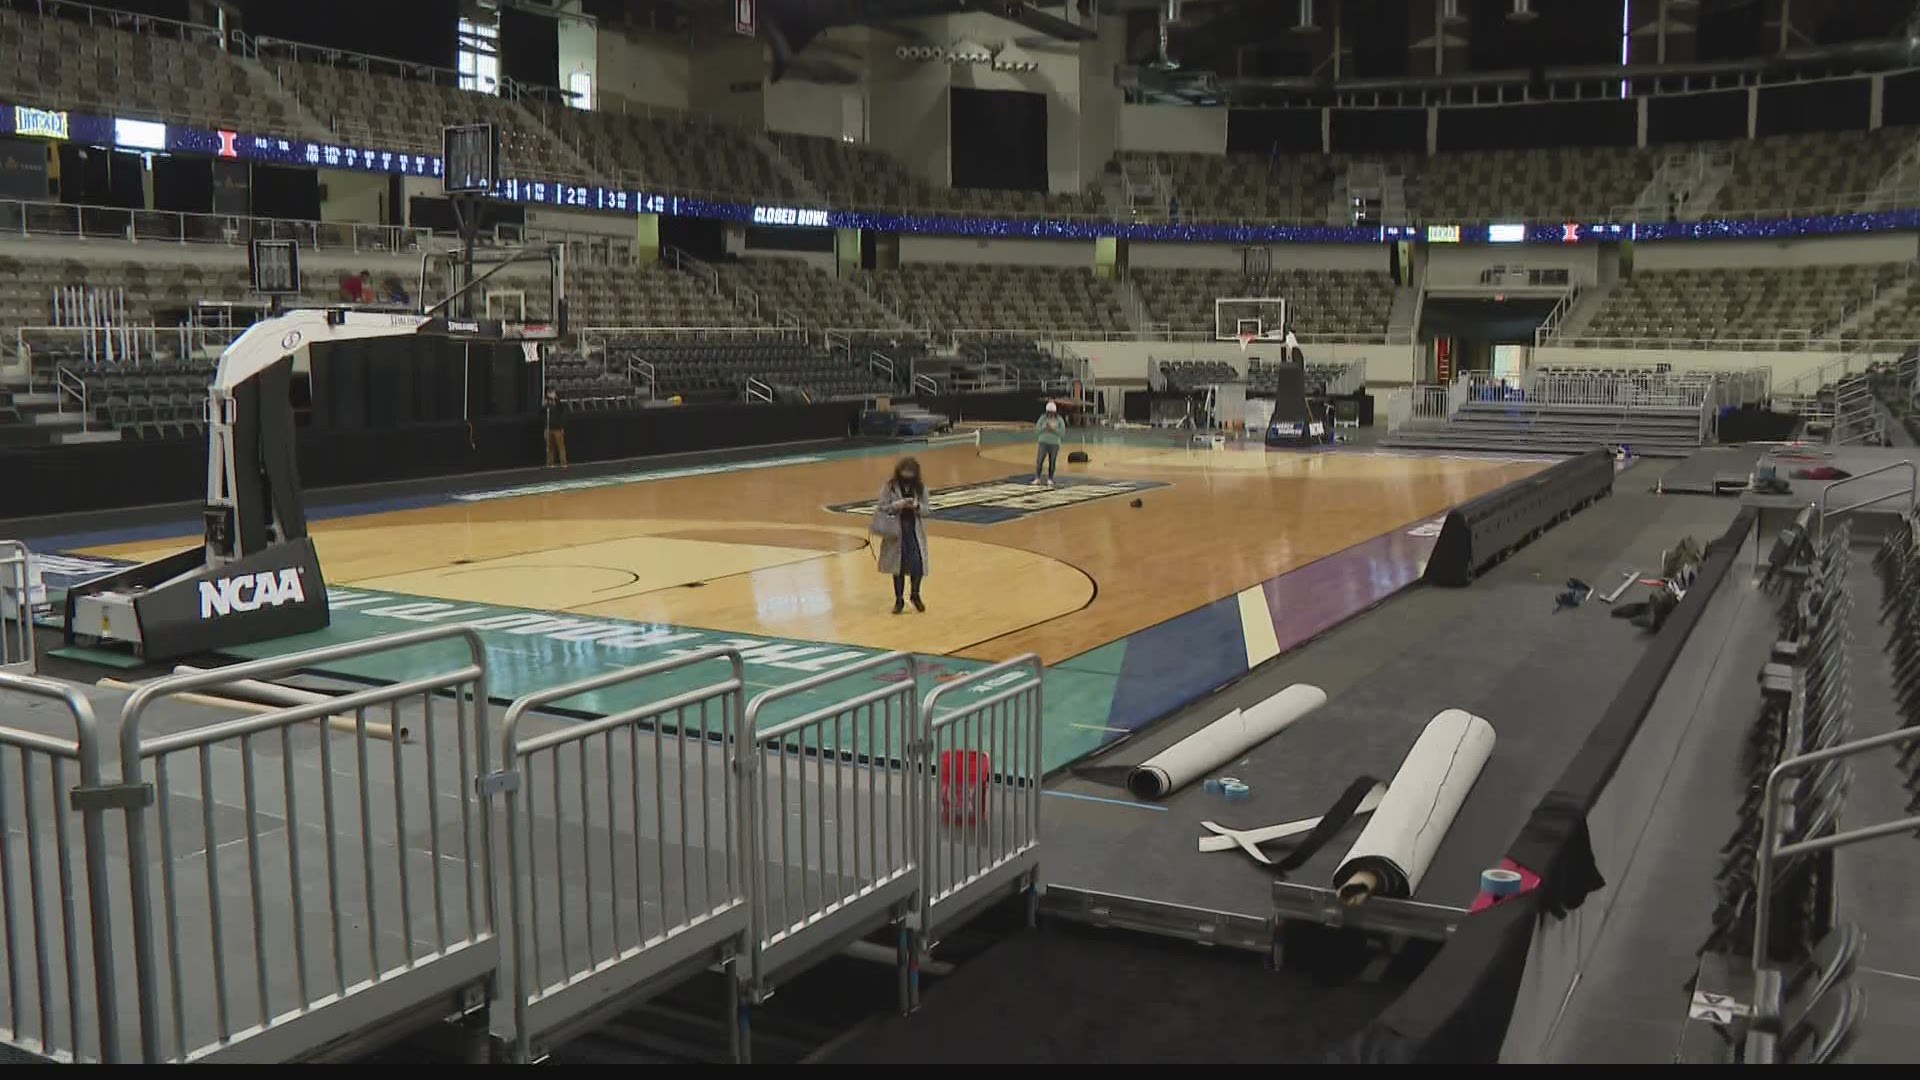 Historic fairgrounds coliseum set to host March Madness games